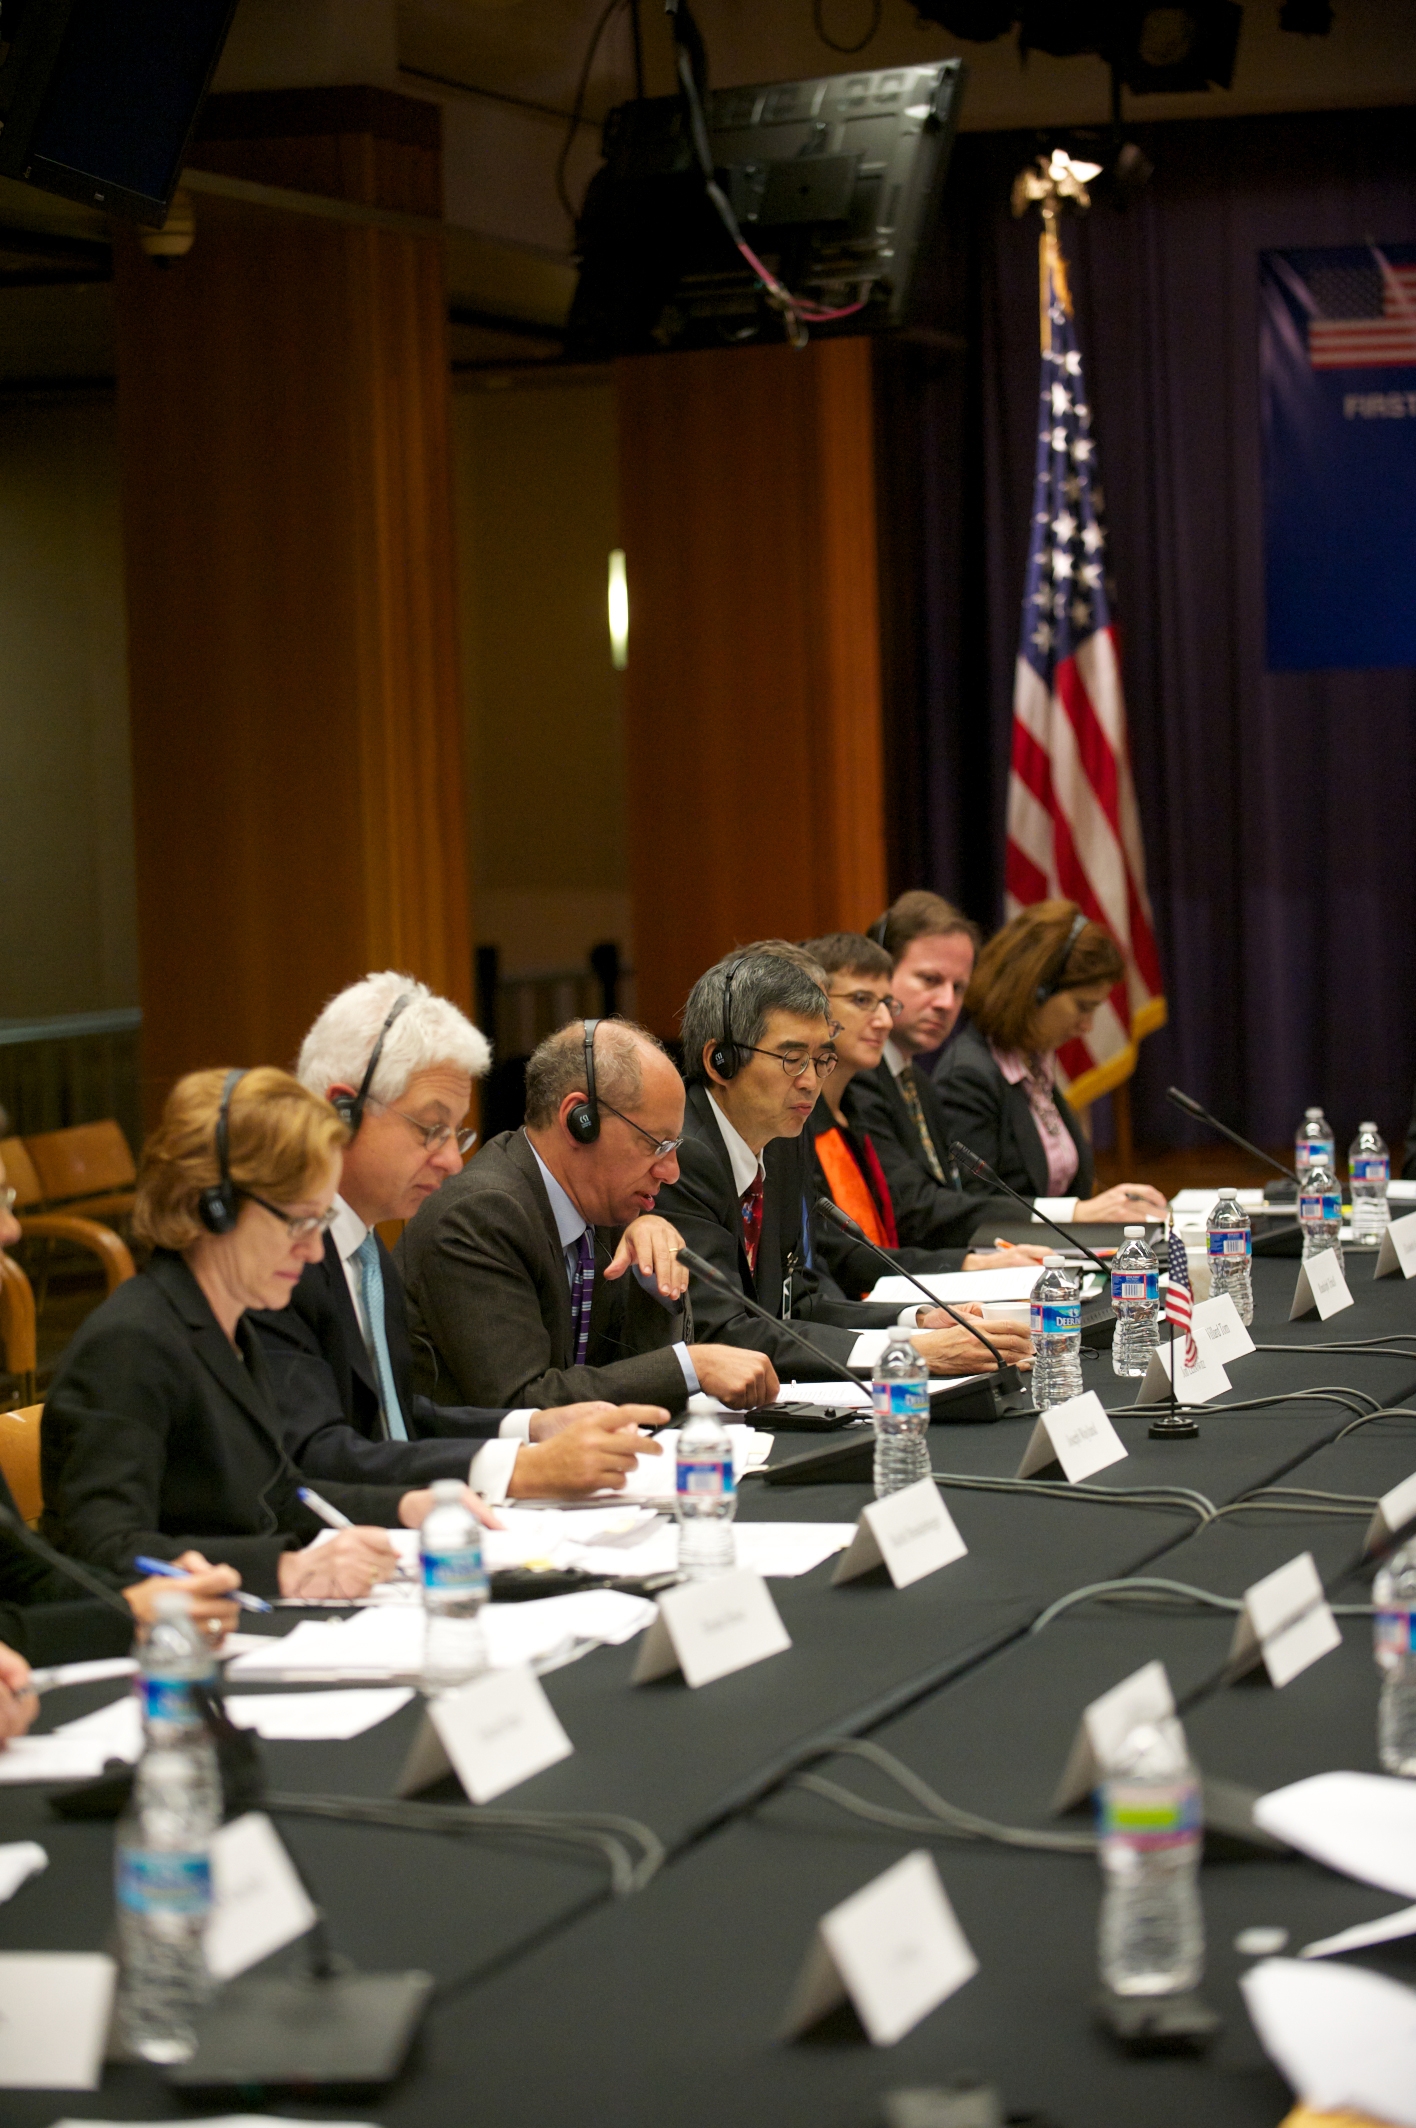 At the first U.S.-China joint dialogue, held in September 2012